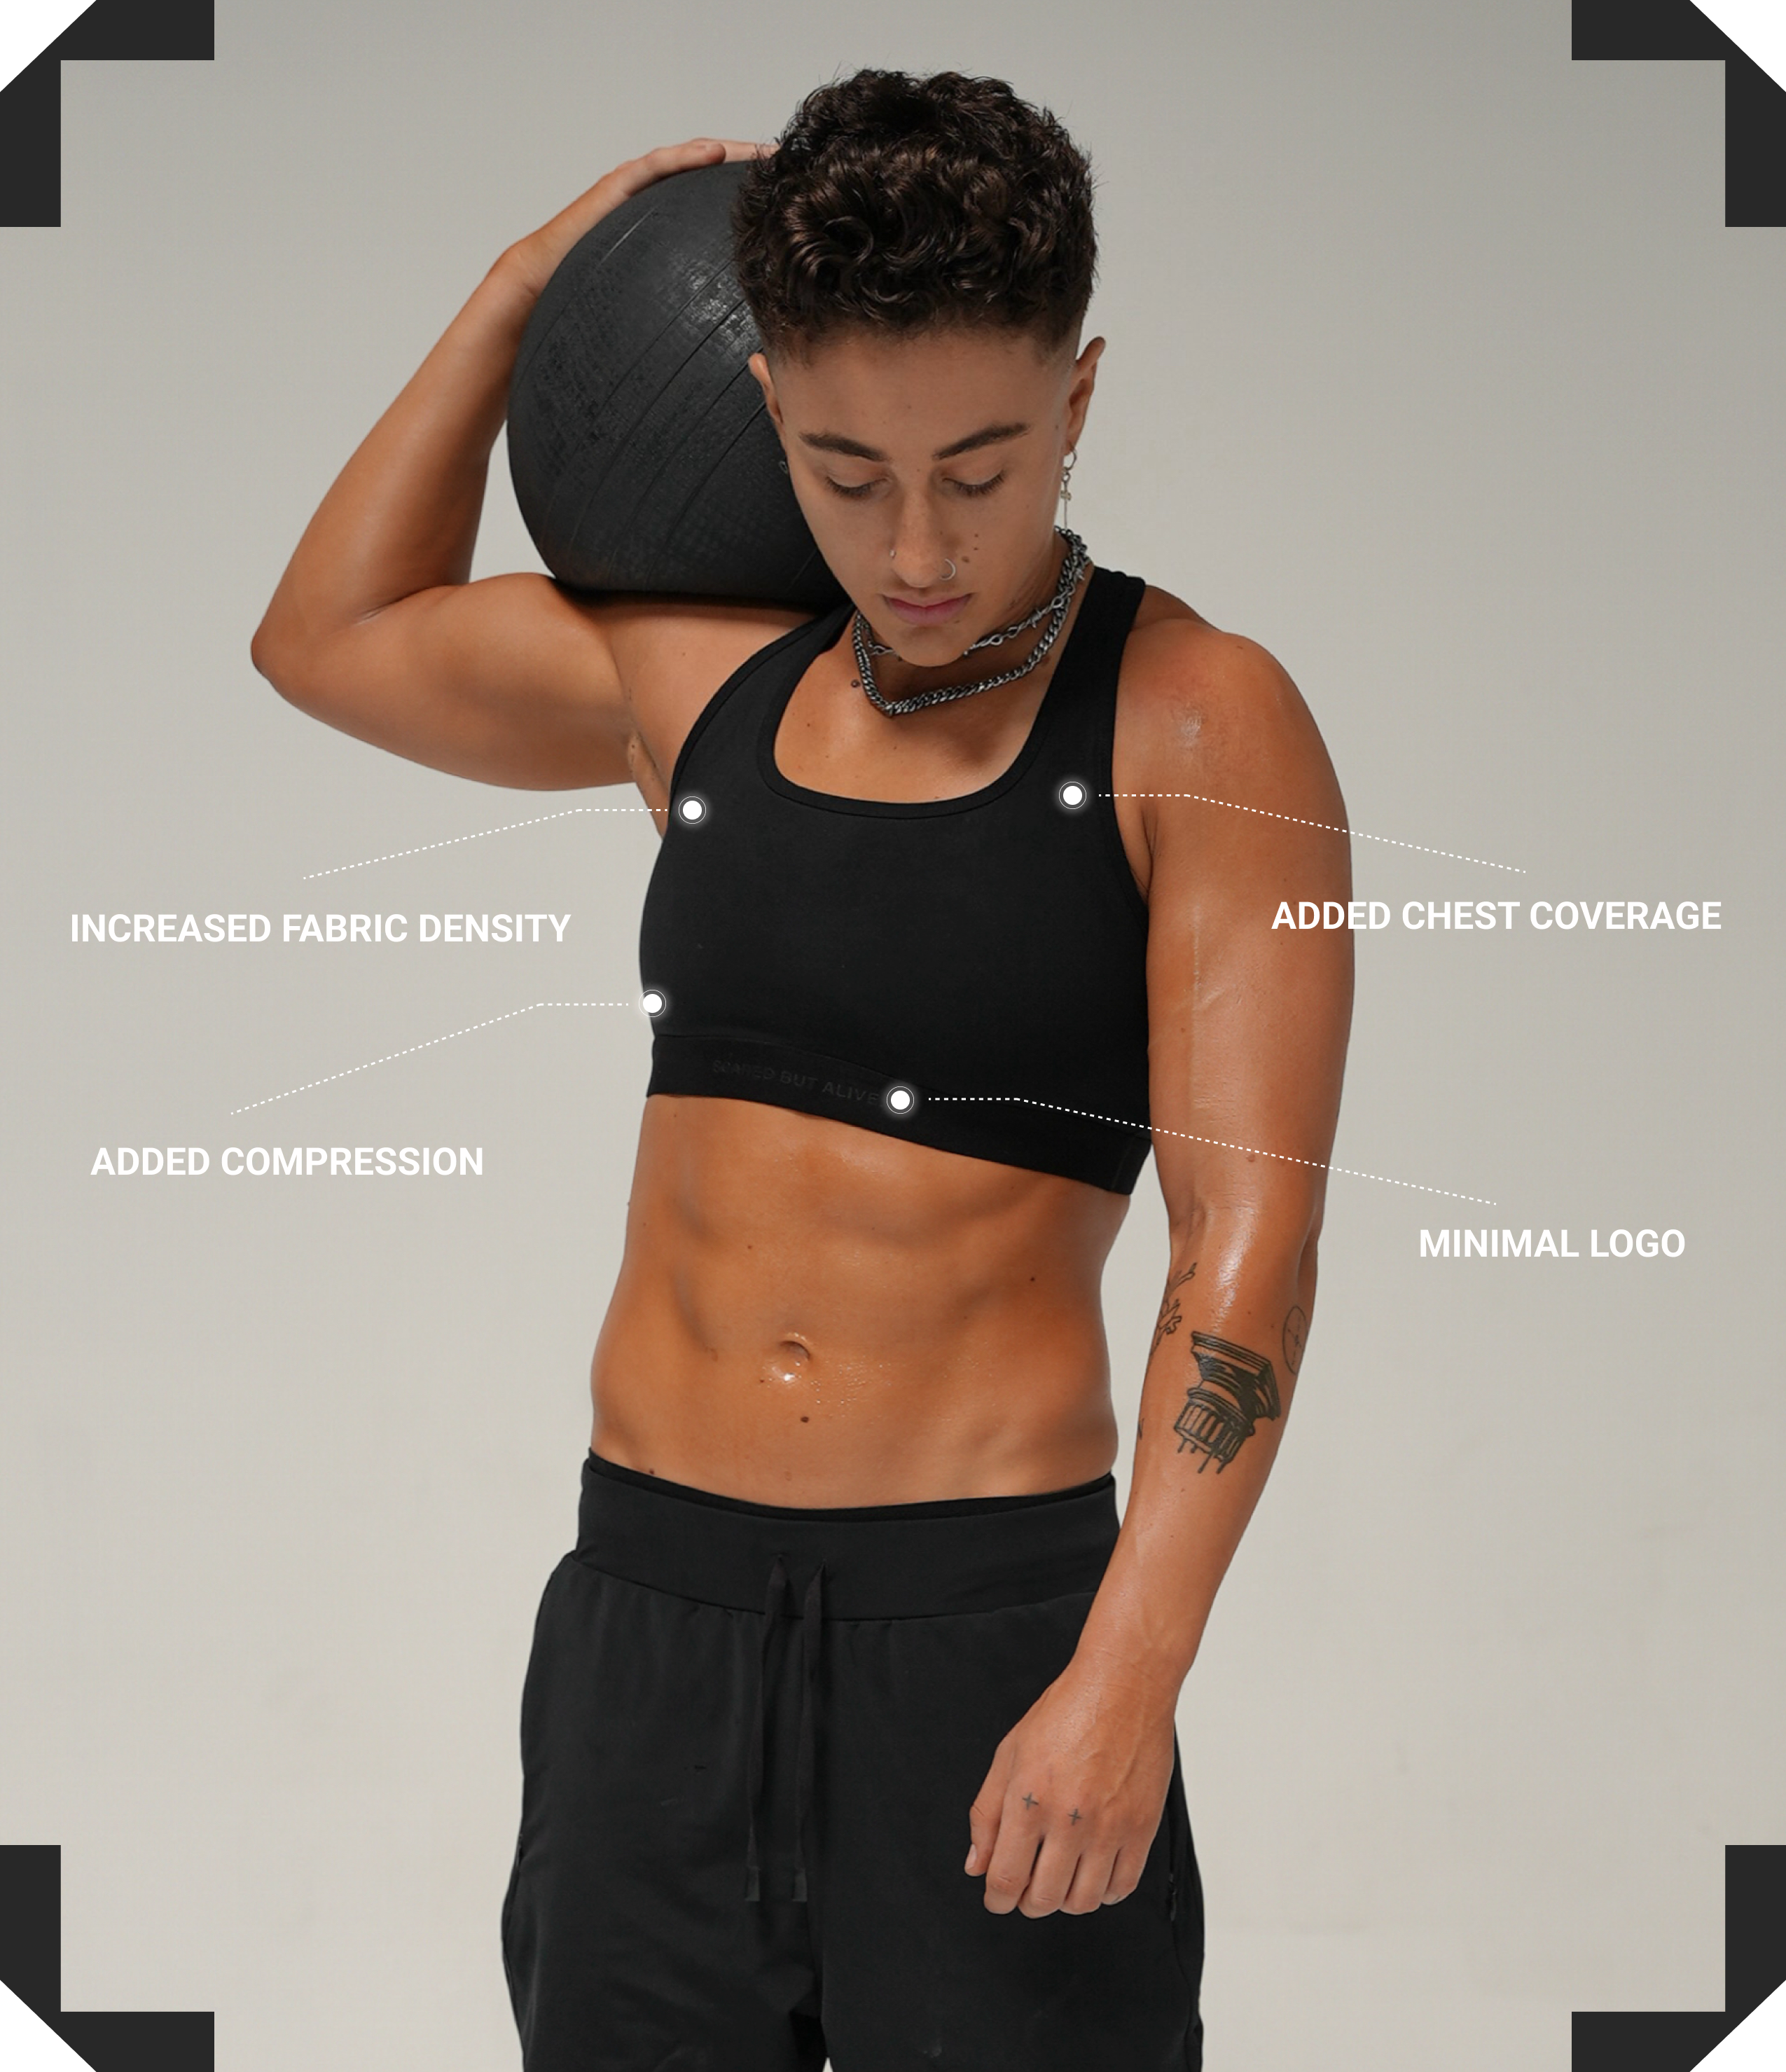 Sydney Sports Bra - front view with specs: increased fabric density, added compression, added chest coverage, minimal logo